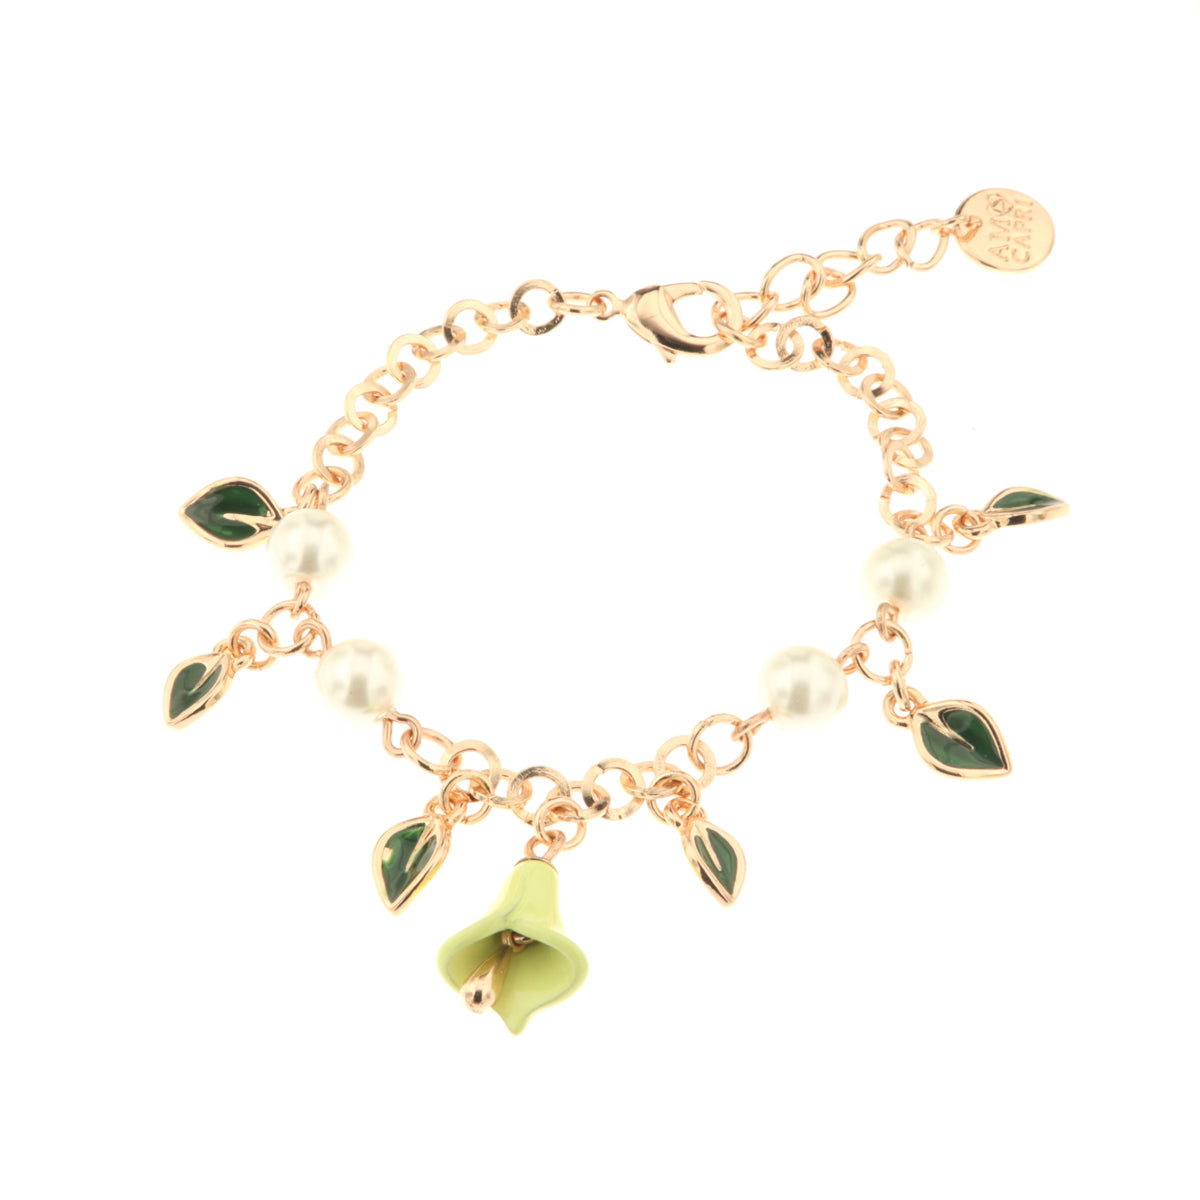 Metal bracelet with white pearls, calla -shaped bell and leaves embellished with colored glazes